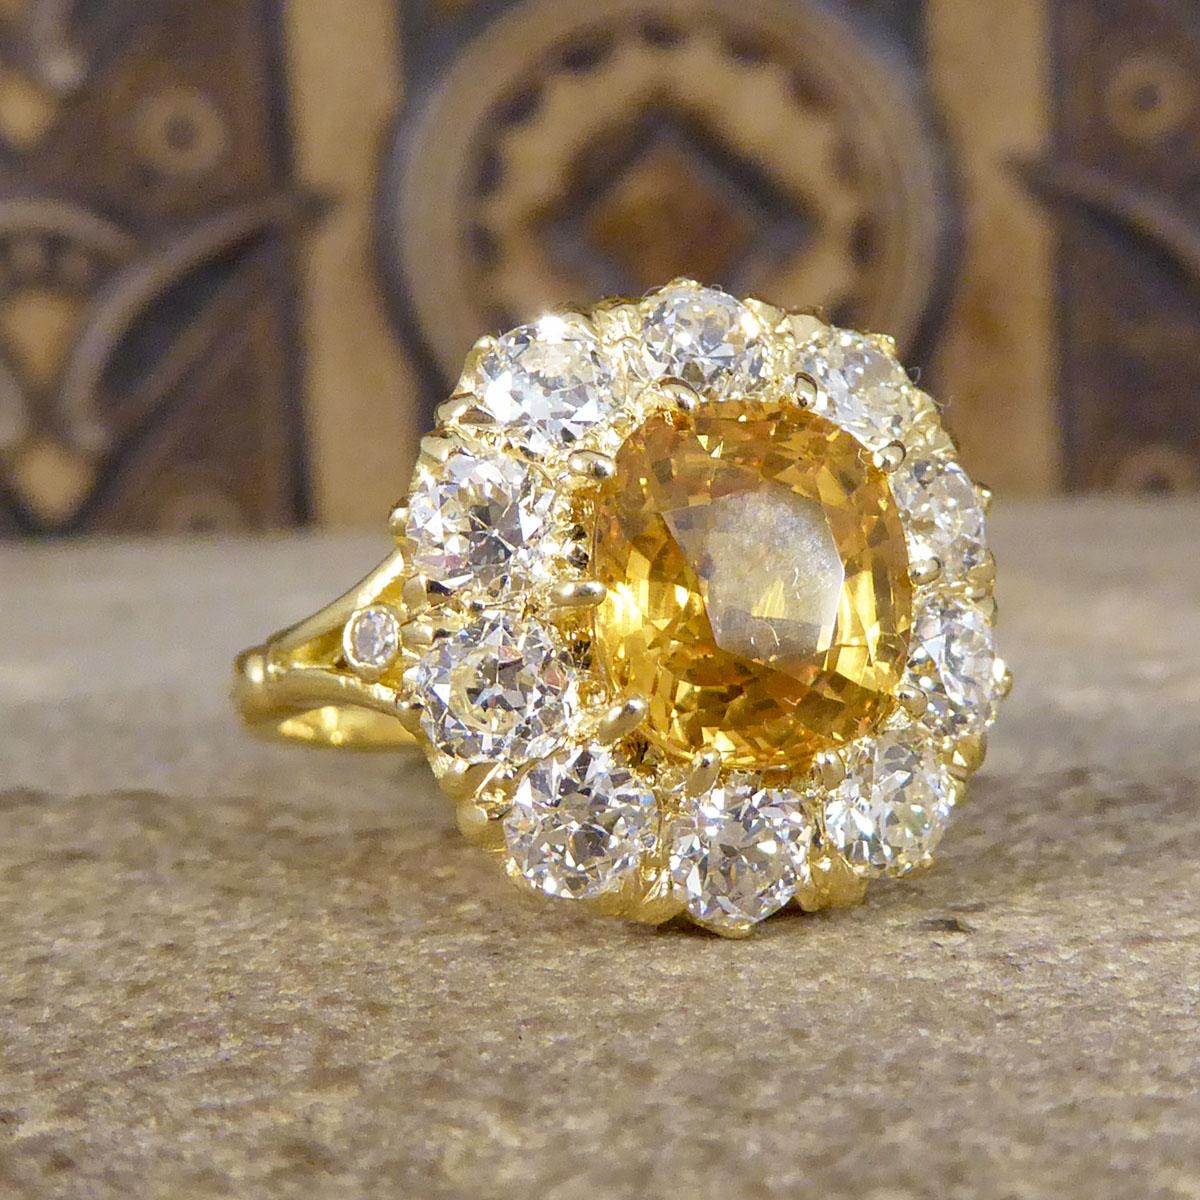 This beautiful ring features a yellow Sapphire weighing 3.60ct held securely into place with a ten claw gold setting. This yellow Sapphire is surrounded by 10 Old European cut Diamonds weighing 2.10ct in total, with two small diamonds on each